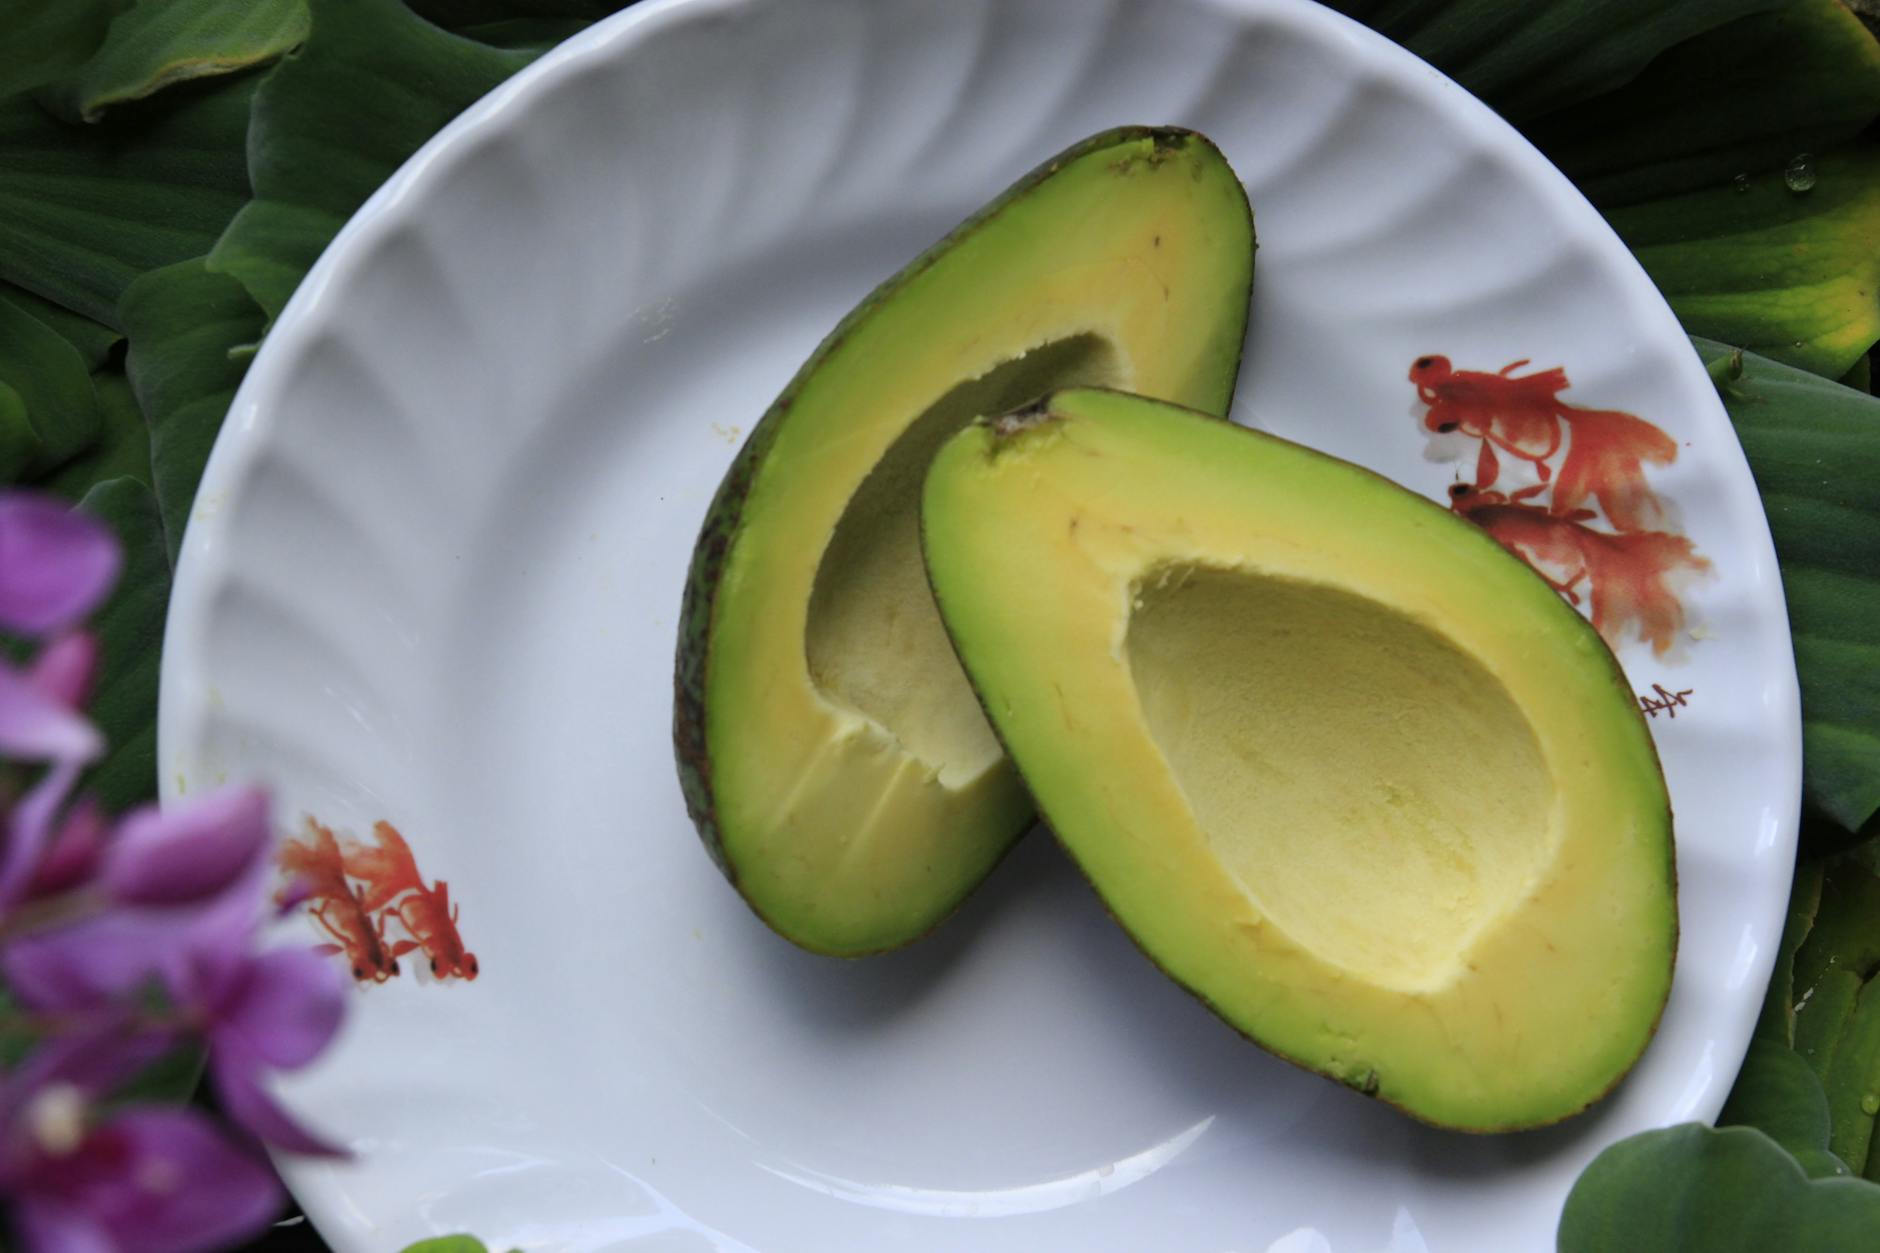 Avocado: What nutrients are you getting from avocado?